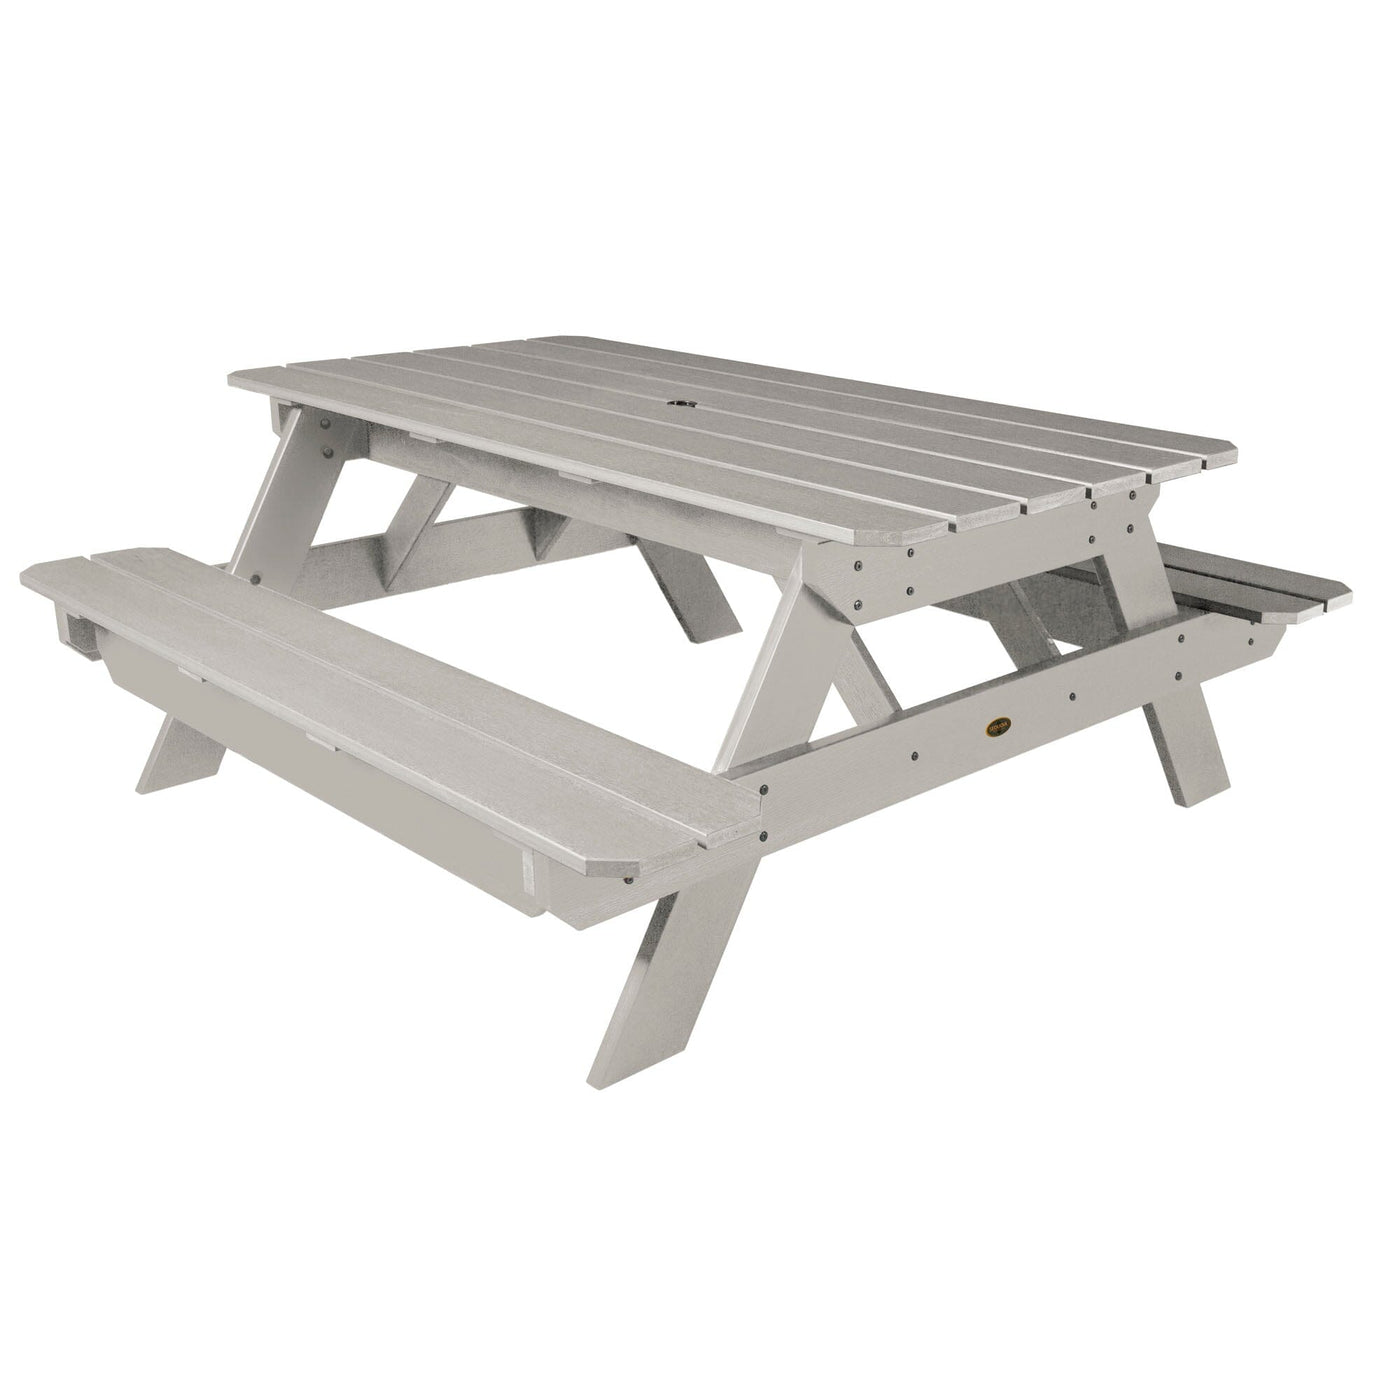 Commercial Grade "National" Picnic Table Dining Sequoia Professional Harbor Gray 